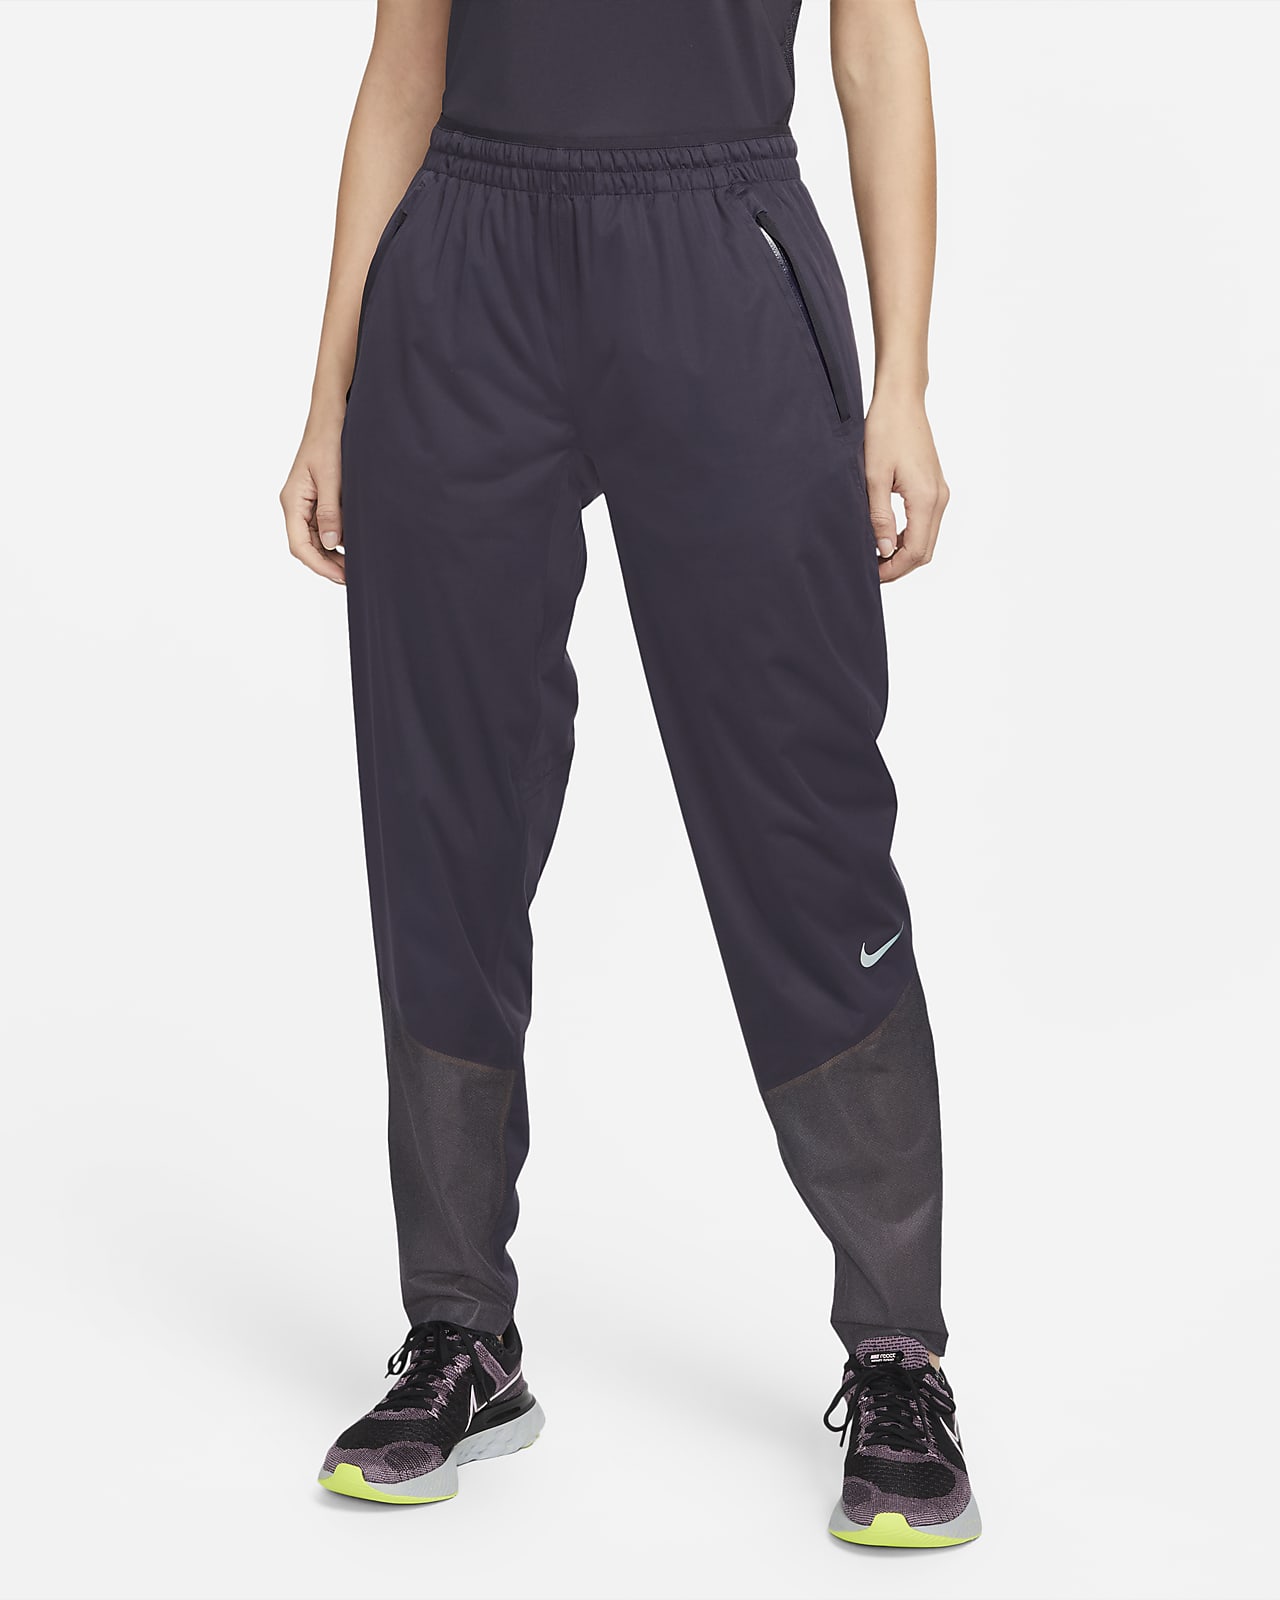 Nike Storm-FIT ADV Run Division Women's Running Trousers